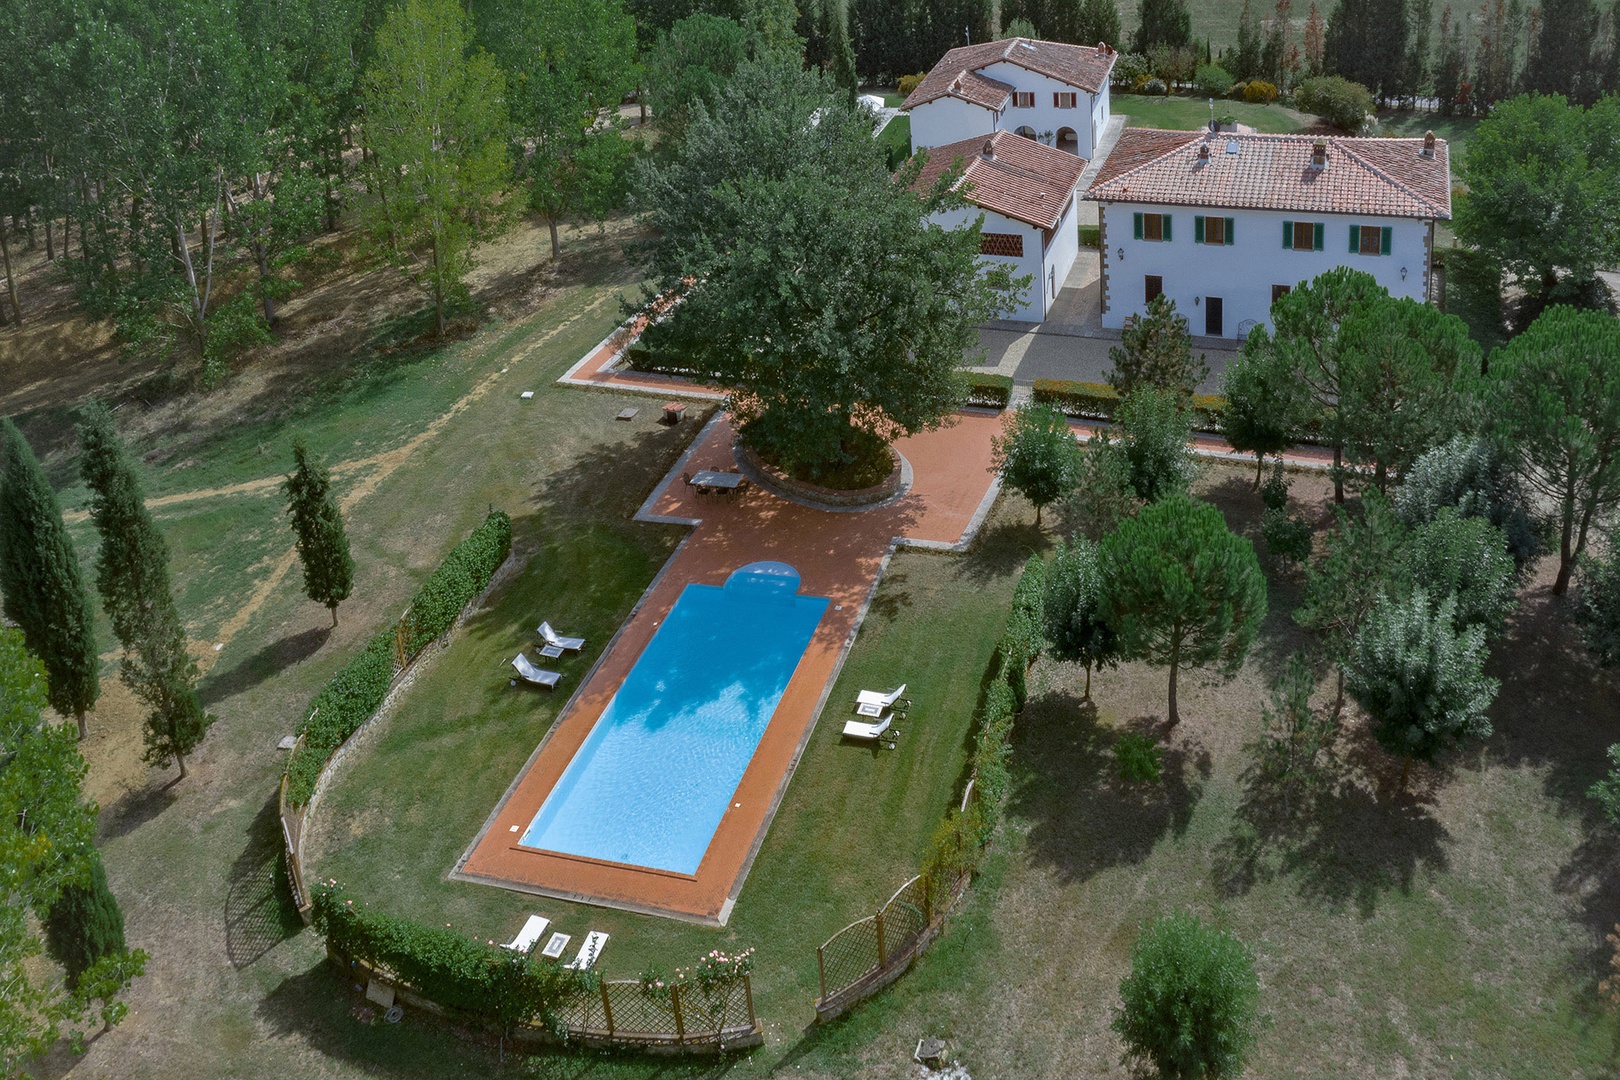 Aquila Villa are perfect for nature lovers, surrounded by trees and a beautiful garden.